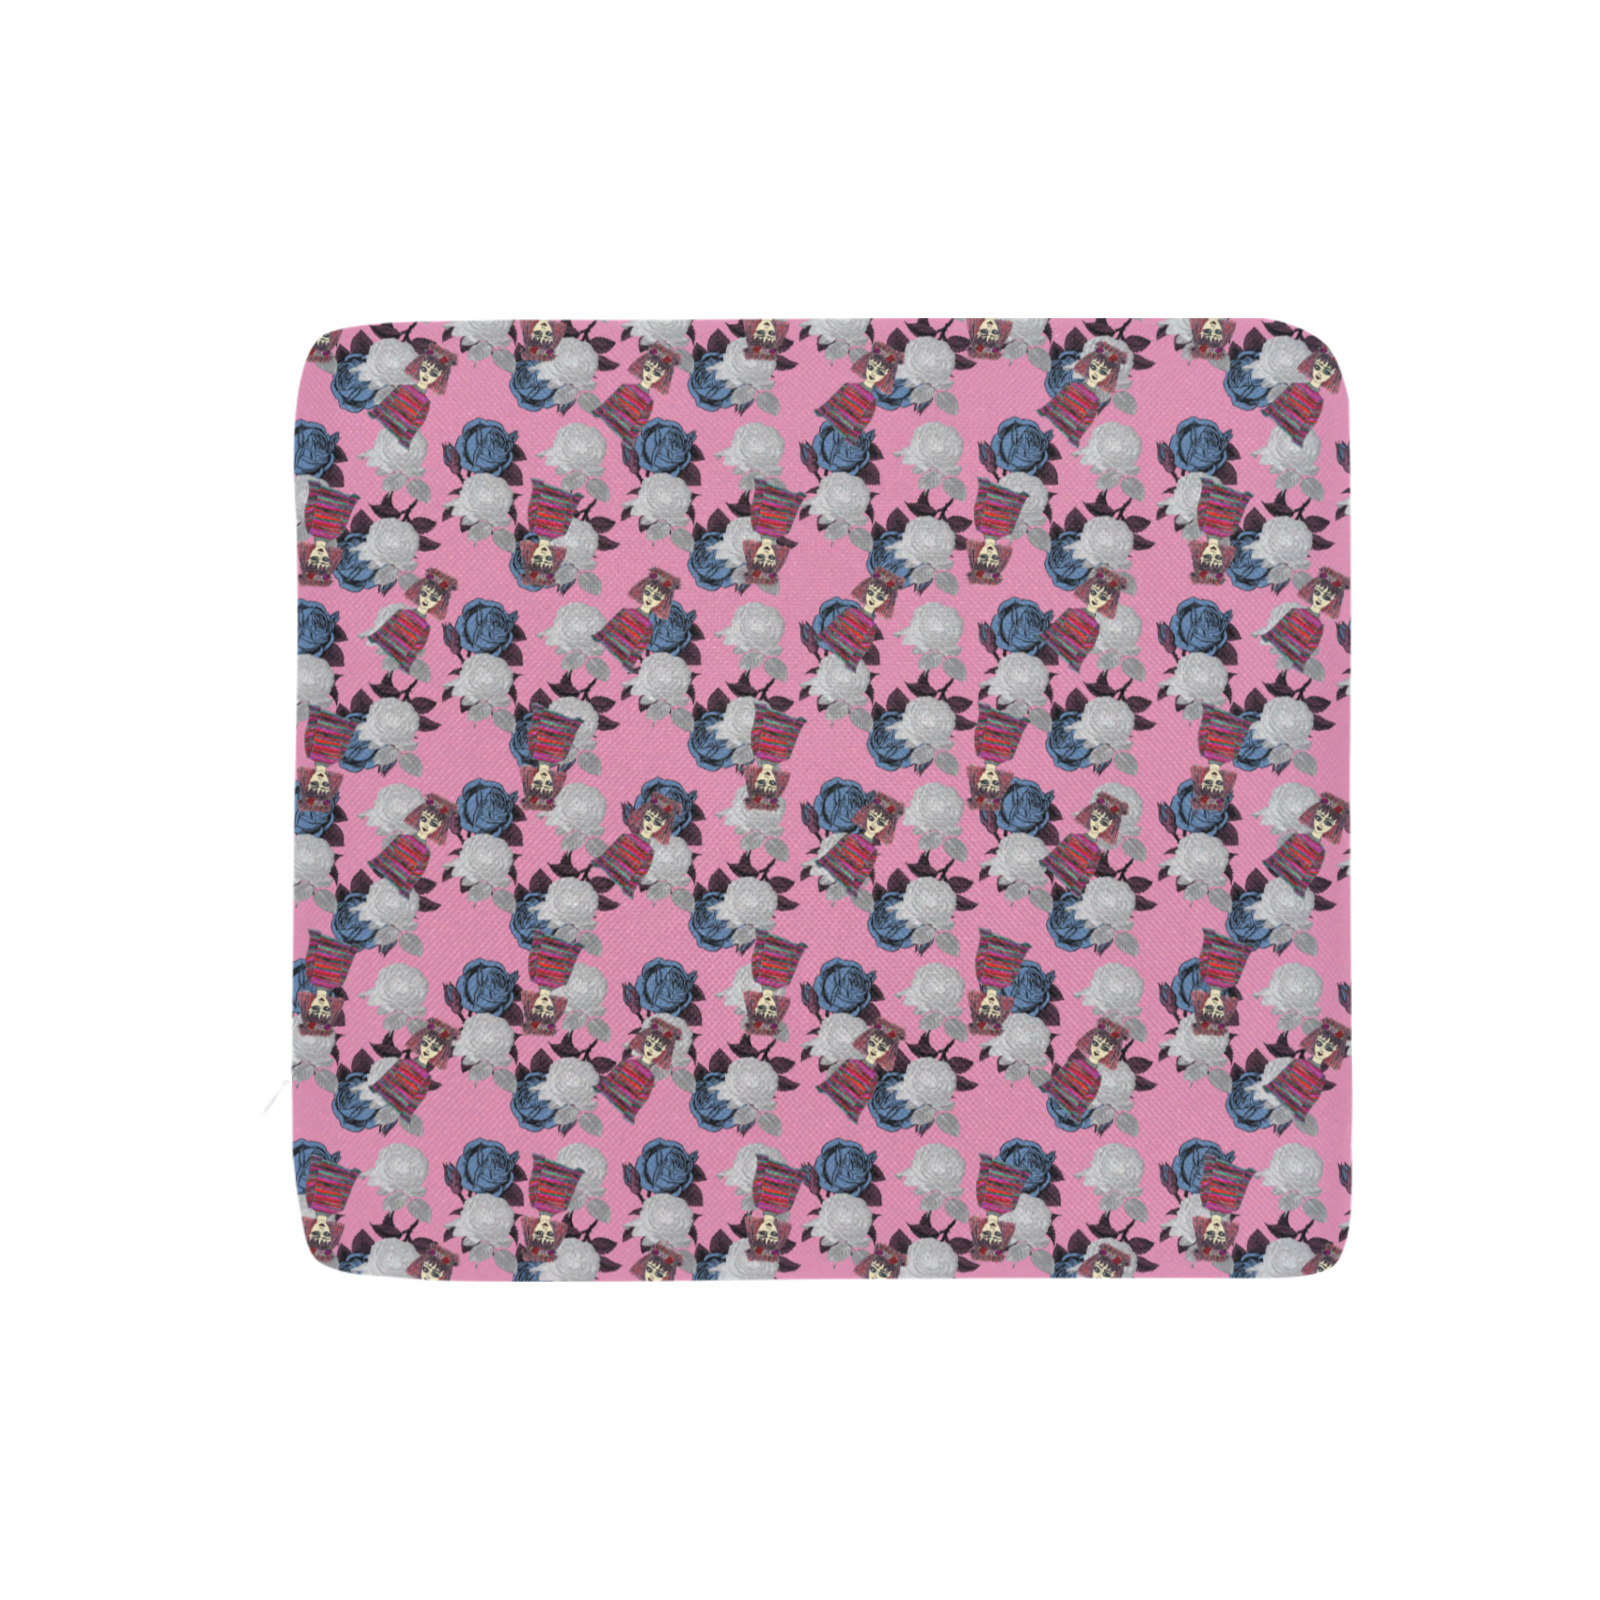 vintage floral and goth girl Rectangular Seat Cushion